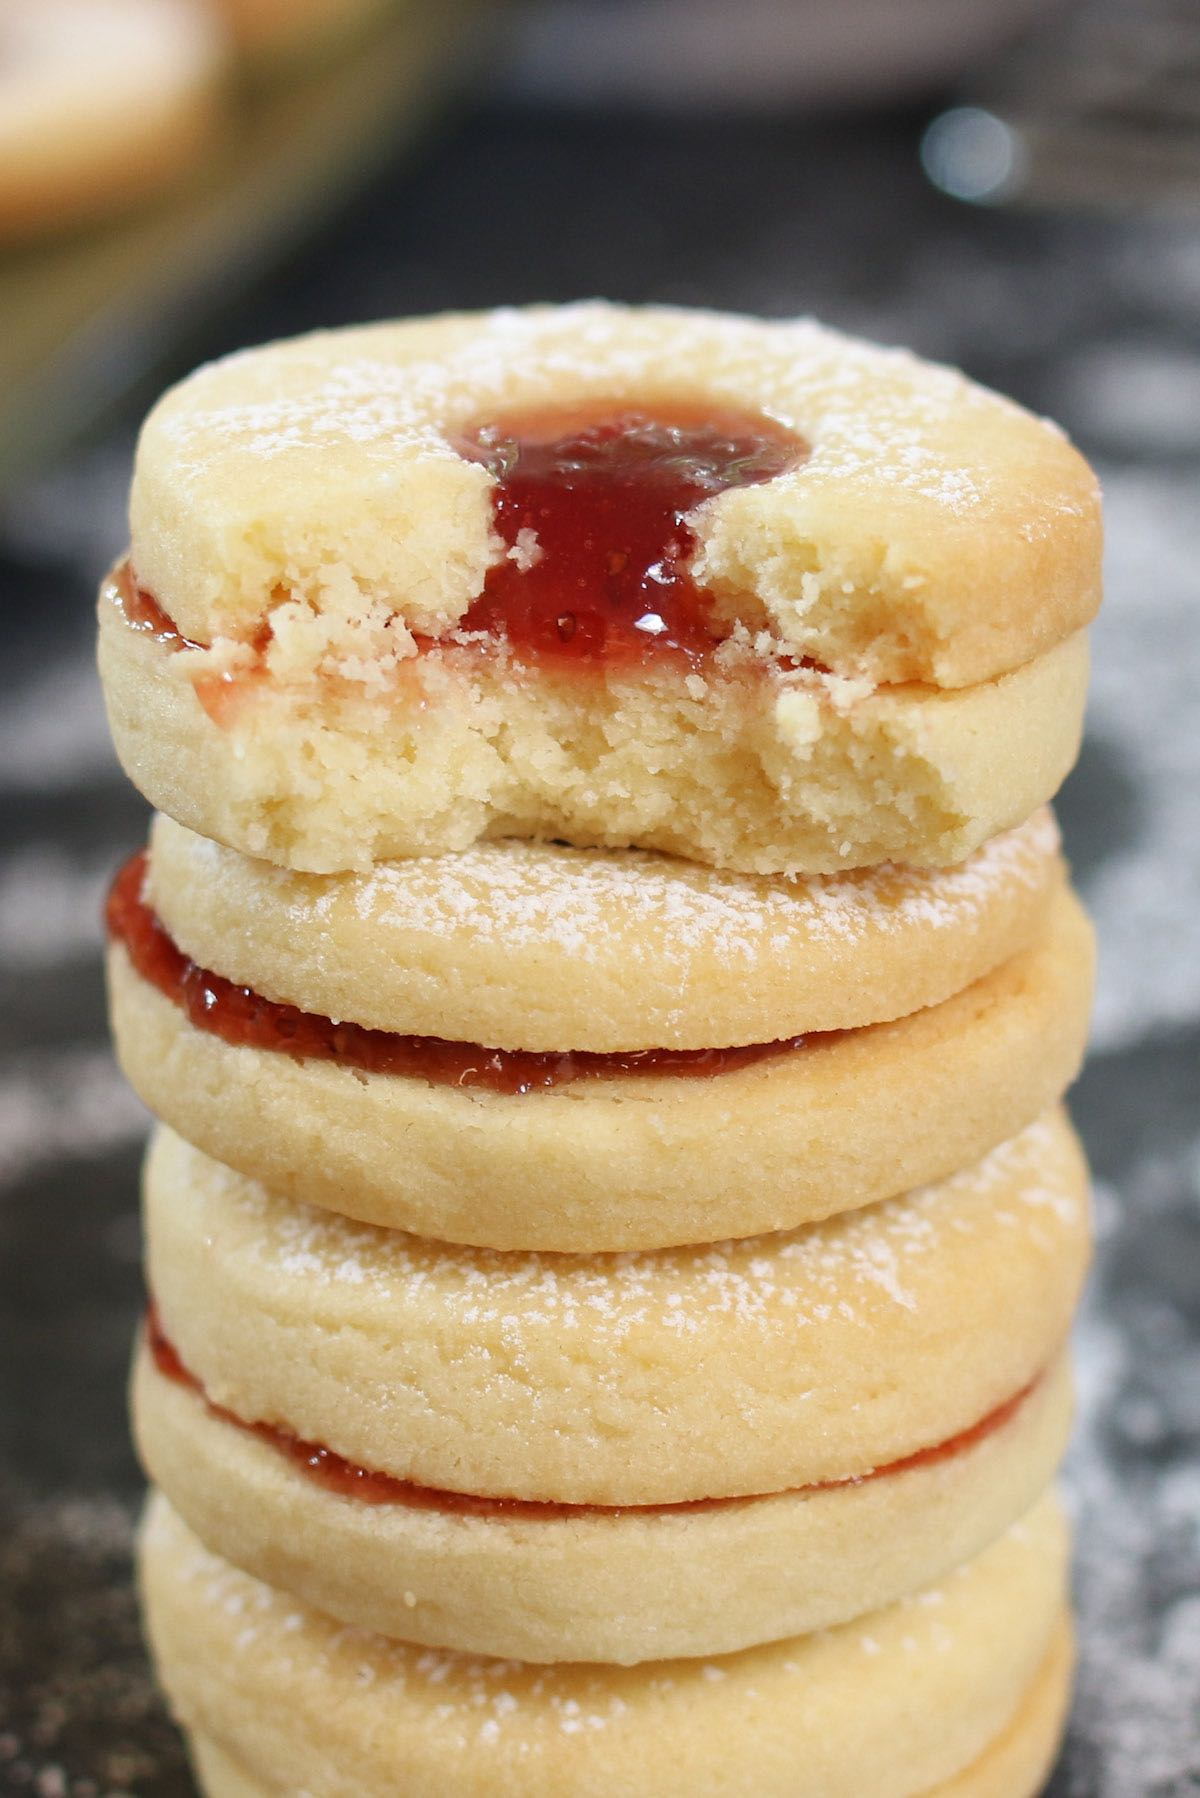 Bite out of a Jammie Dodger cookie, showing the soft and chewy texture.